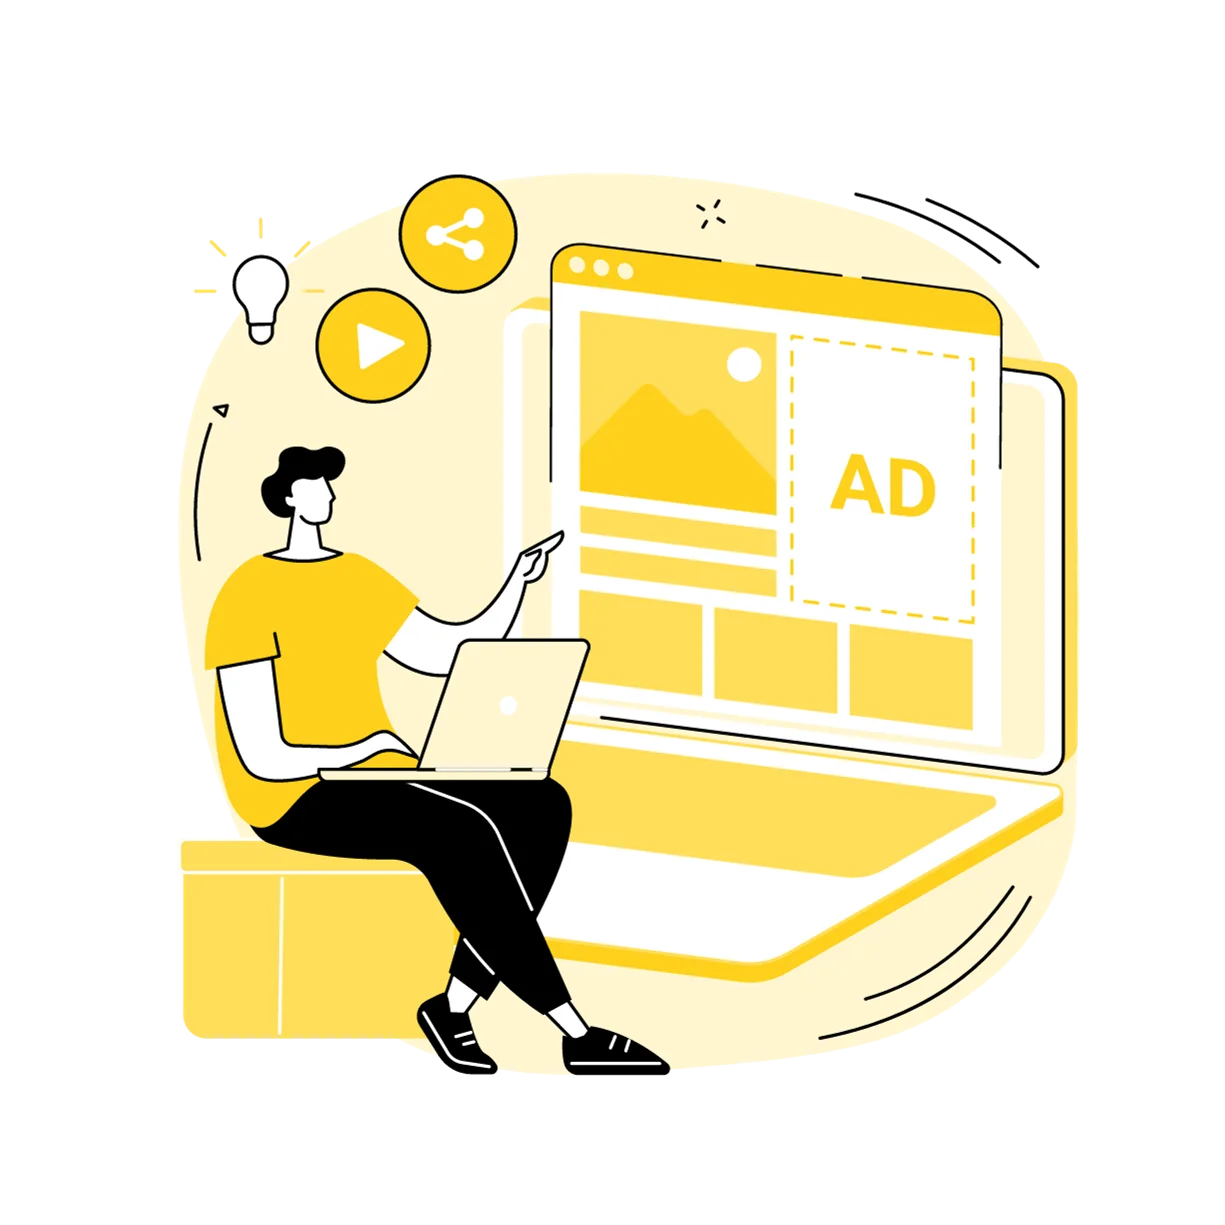 Expertly immersed in Amazon Ads Management, fine-tuning campaigns for impactful digital advertising.